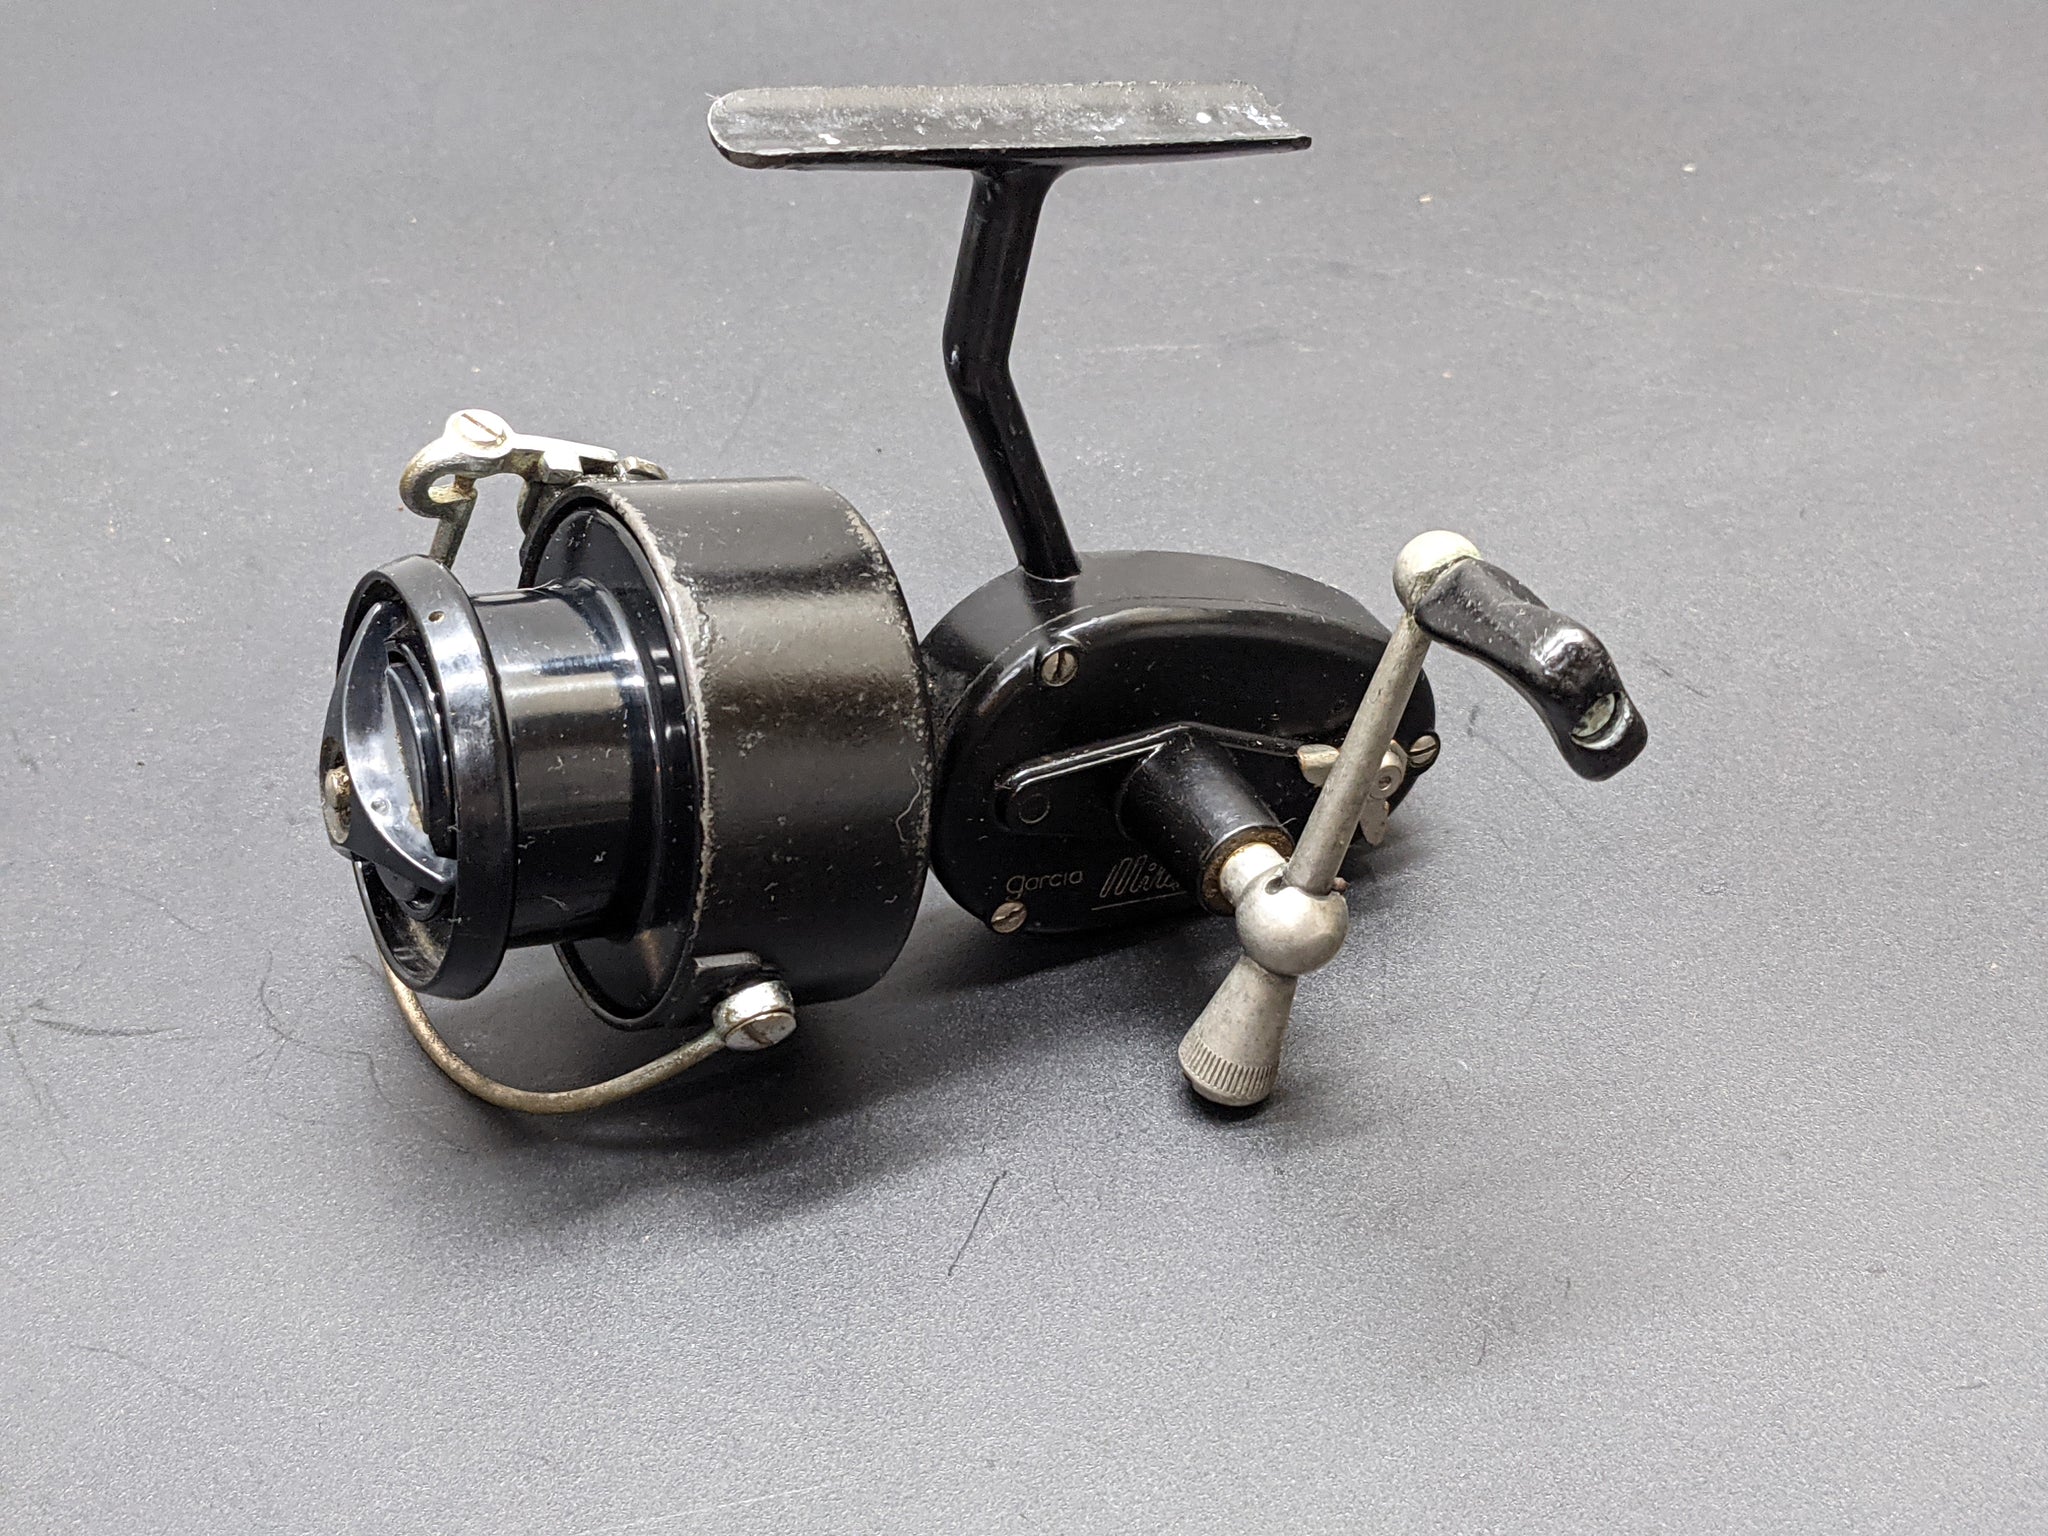 Mitchell 300 Spinning Fishing Reel